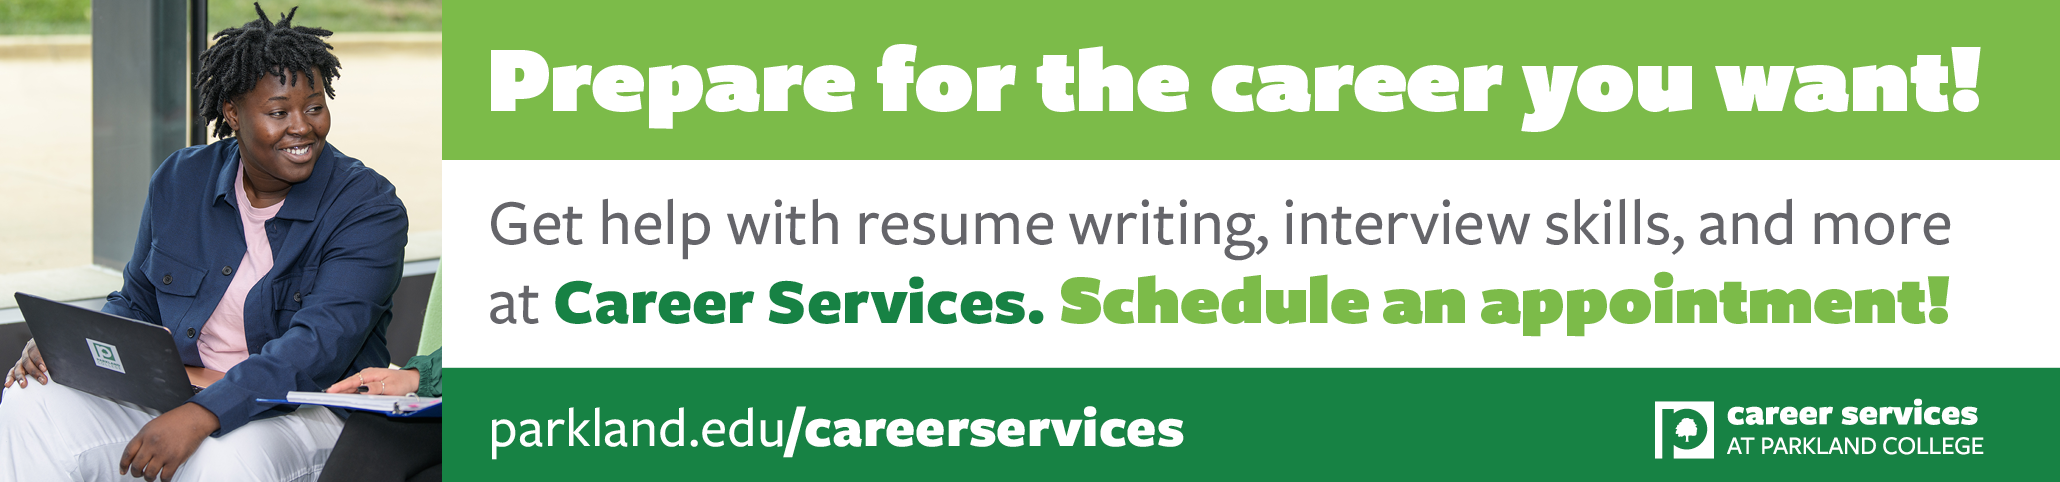 Prepare for the career you want with Career Services